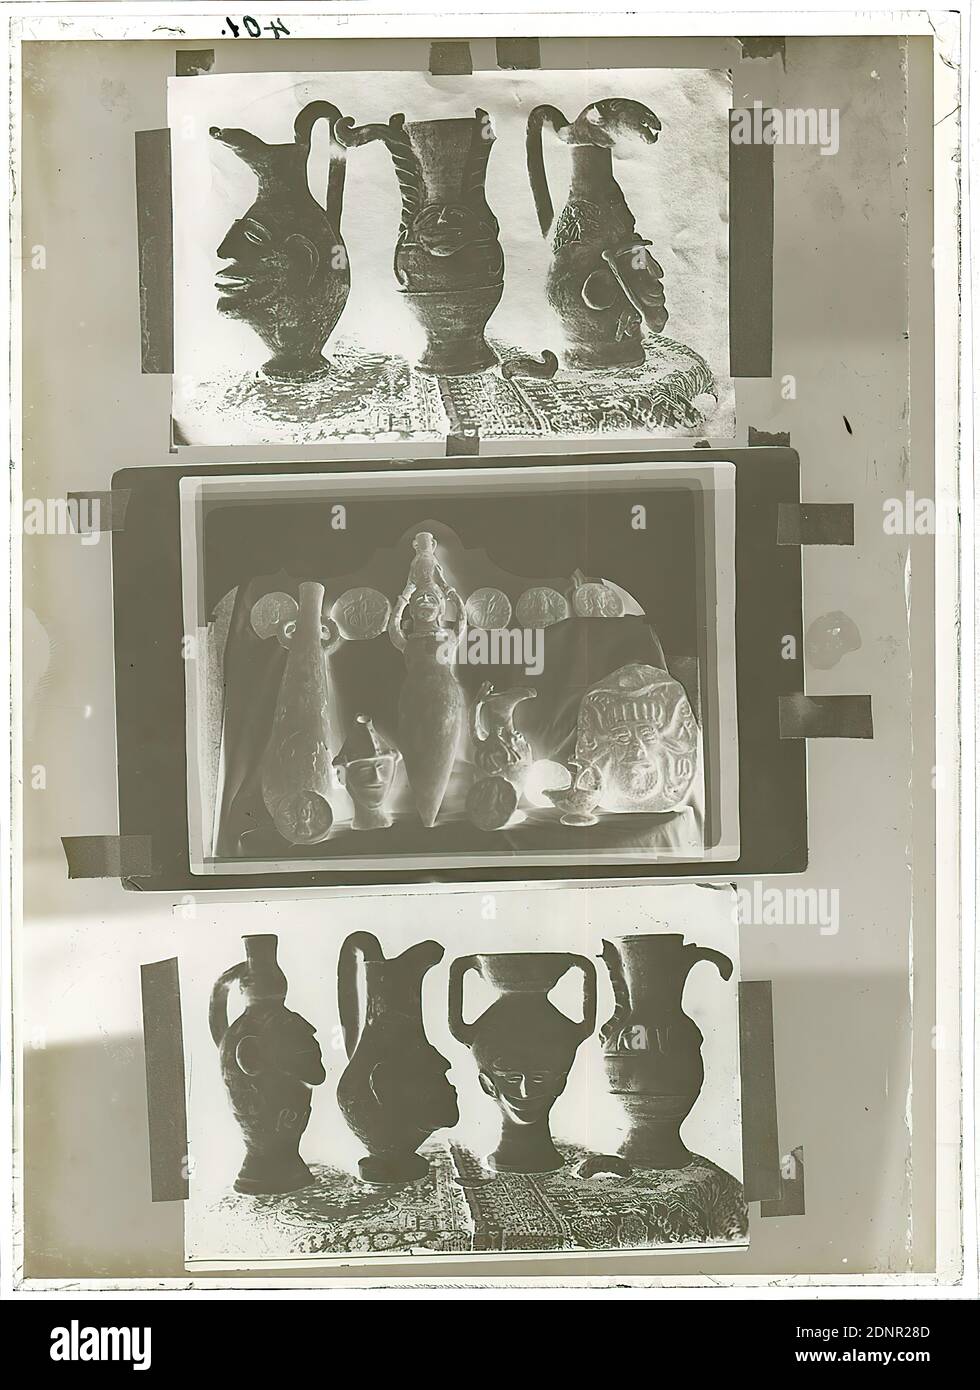 Wilhelm Weimar, Three photographs of craft objects, glass negative, black and white negative process, total: height: 23.8 cm; width: 17.8 cm, numbered: top left. : in black ink: 401, photography, jug, mug, cup, goblet, container (ceramics): vessel, jug, pot, vase, head, face, animals as ornament, work of applied art (ceramics), pottery, ceramics (collecting and exhibiting works of art Stock Photo